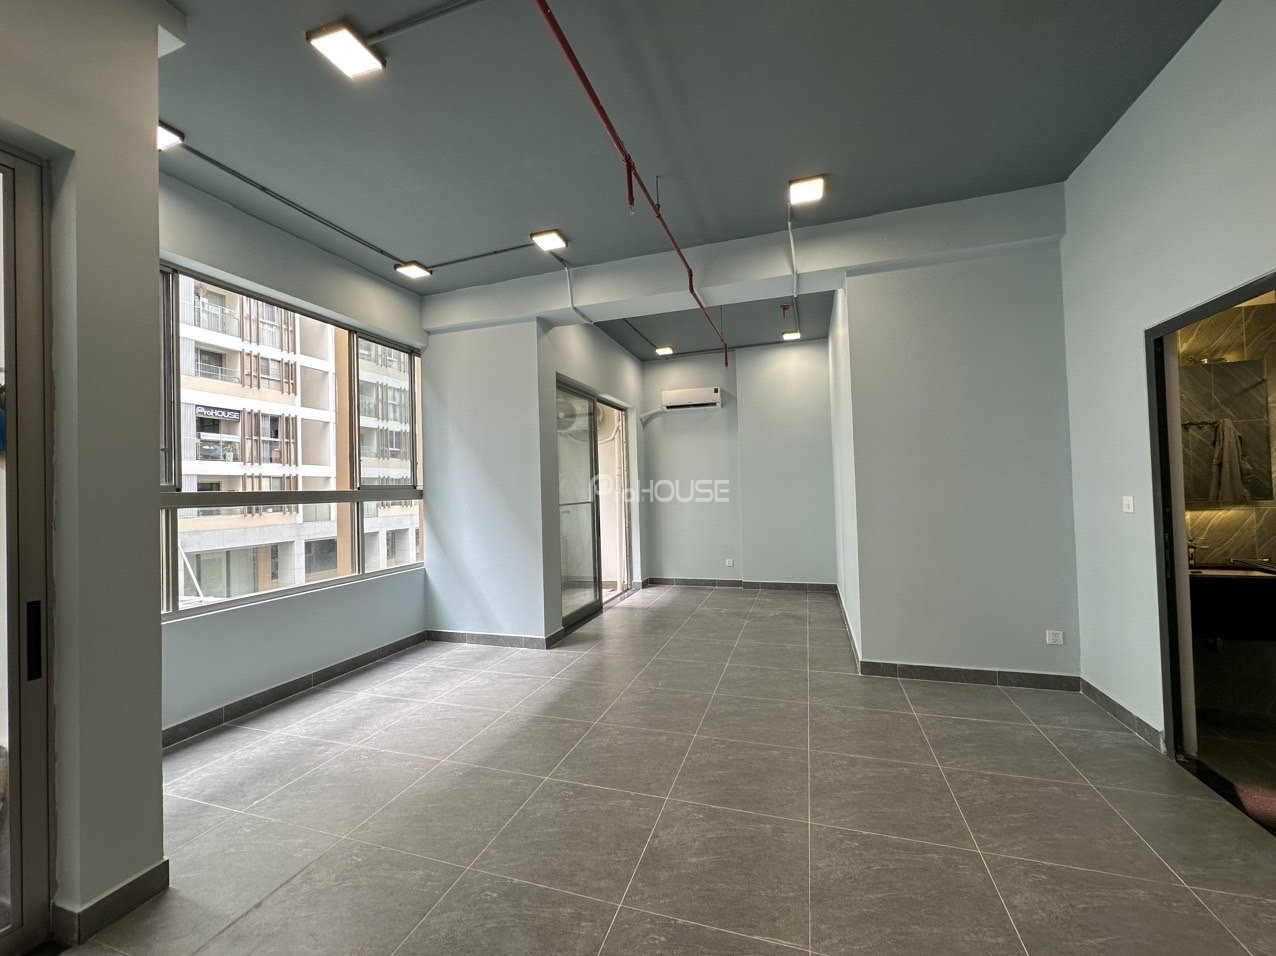 Shophouse 73sqm for rent in Midtown M6 with basic furniture